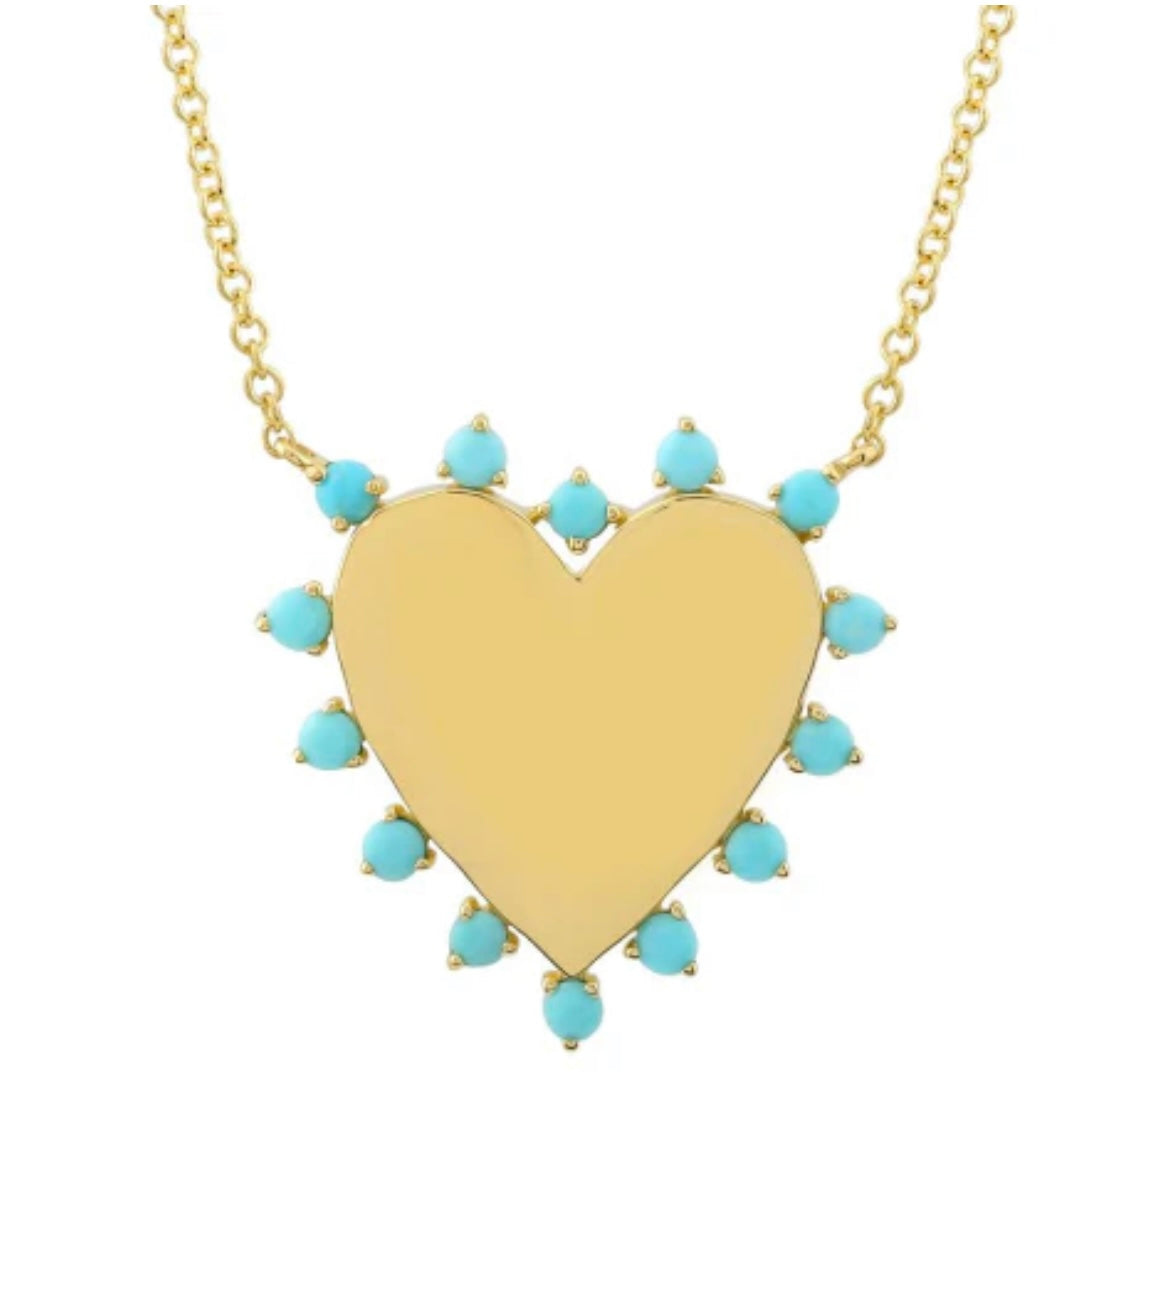 Gold Heart Surrounded by Turquoise